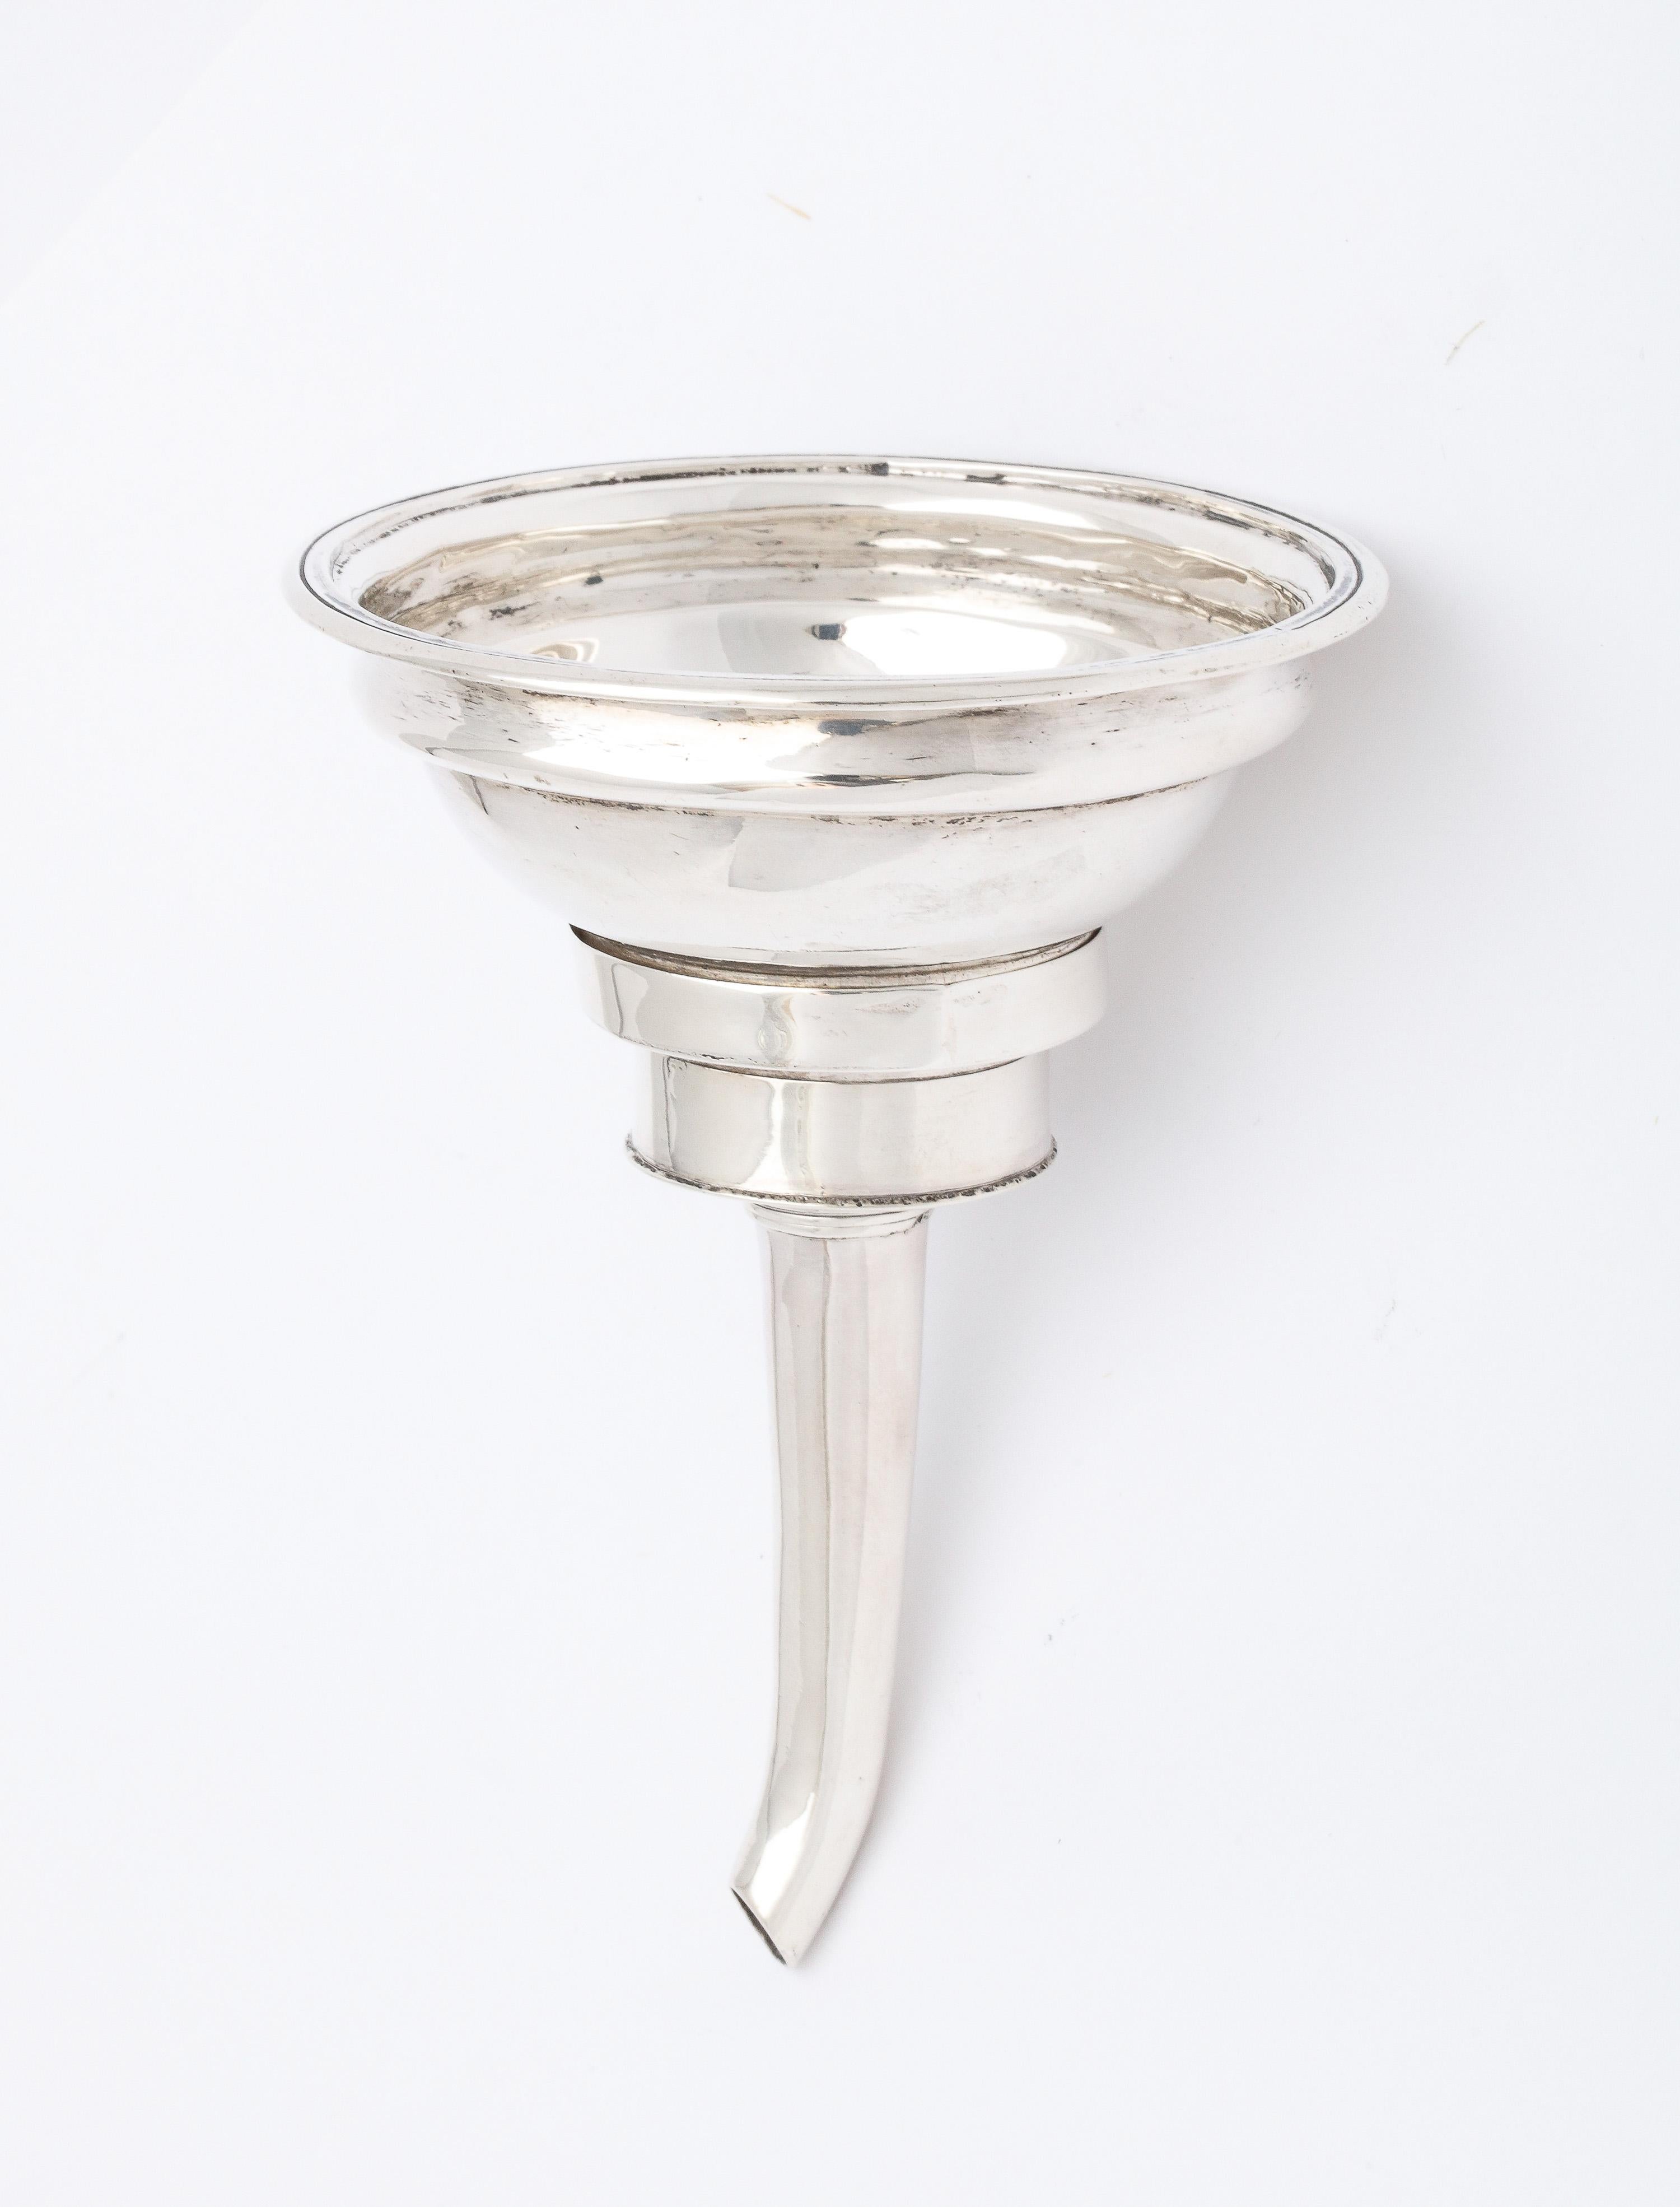 Rare, William IV Period, sterling silver wine funnel, Edinburgh, Scotland, year-hallmarked for 1832, Marshall and Sons - makers (maker's mark is listed  in Wyler's Book of Old Silver, on p. 217). Measures 5 inches high x 3 1/2 inches diameter